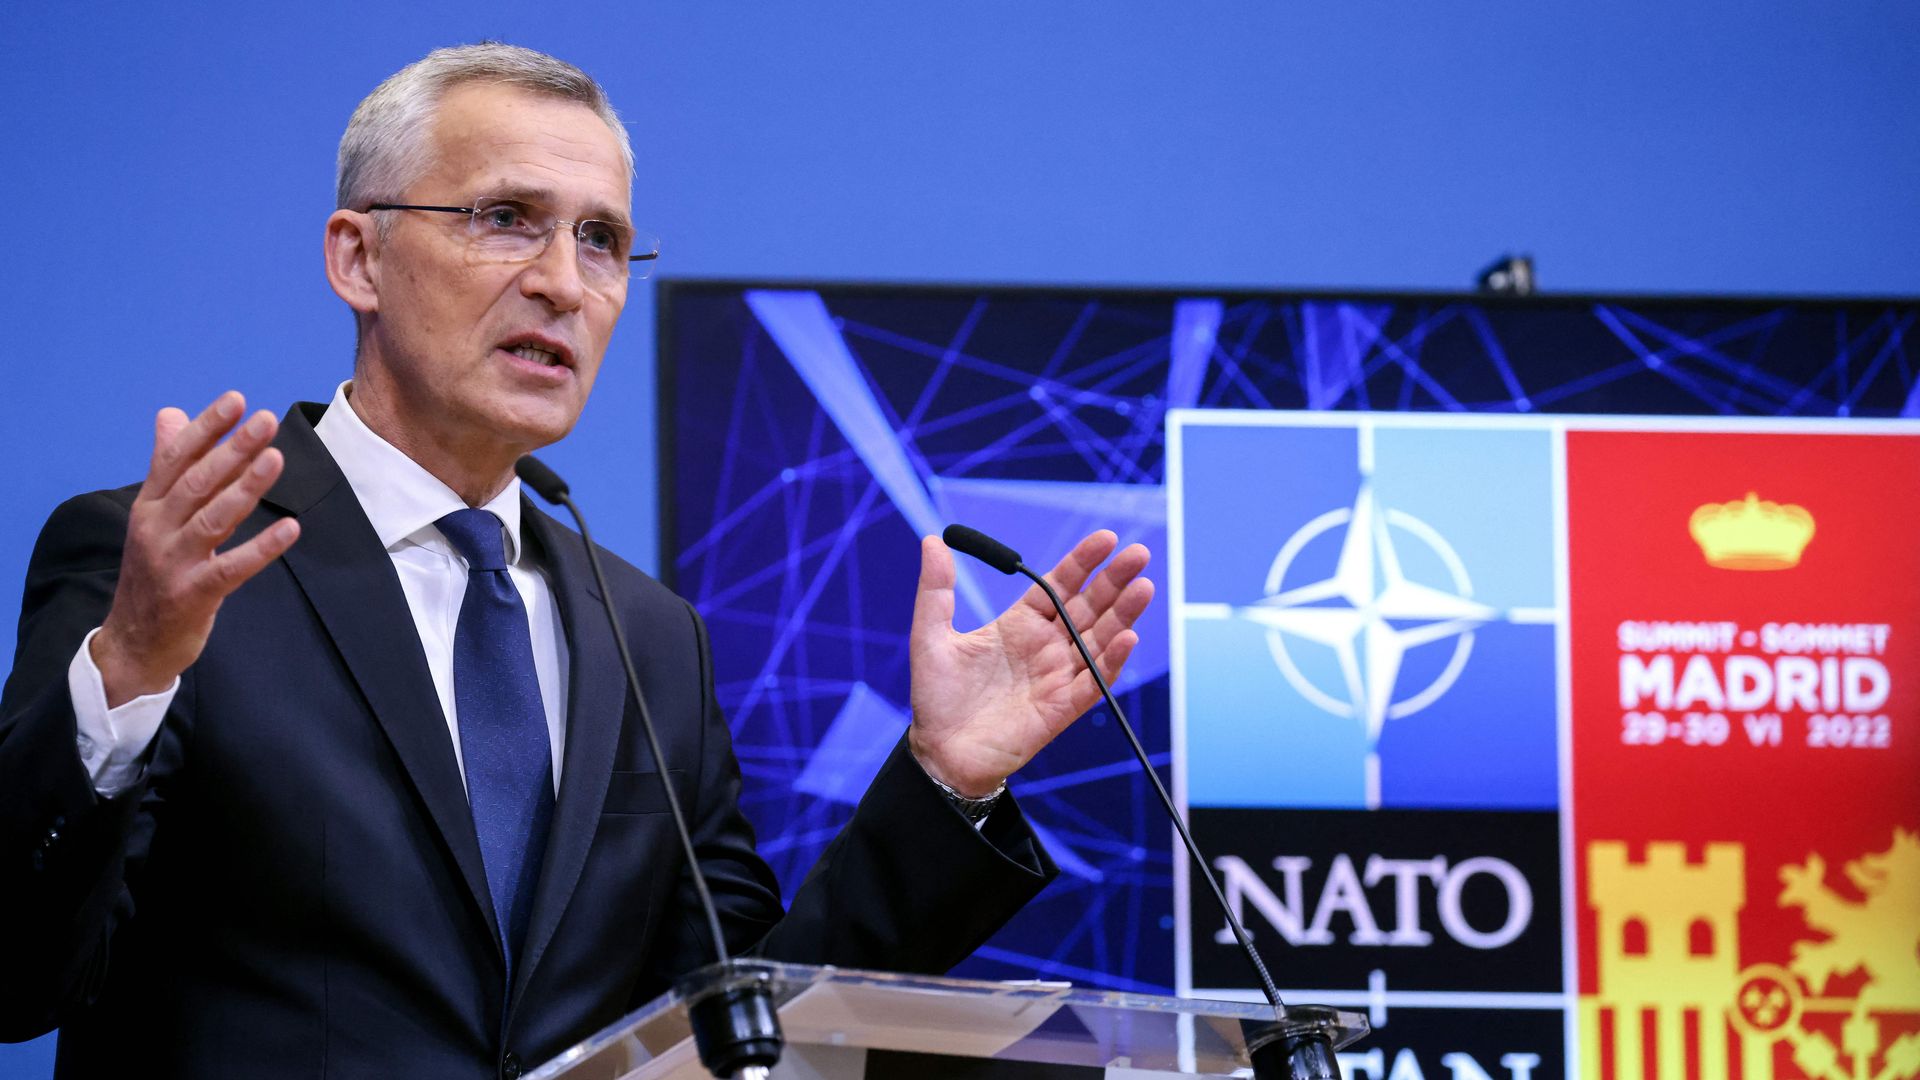 NATO Secretary General Jens Stoltenberg gestures as he speaks during a press conference